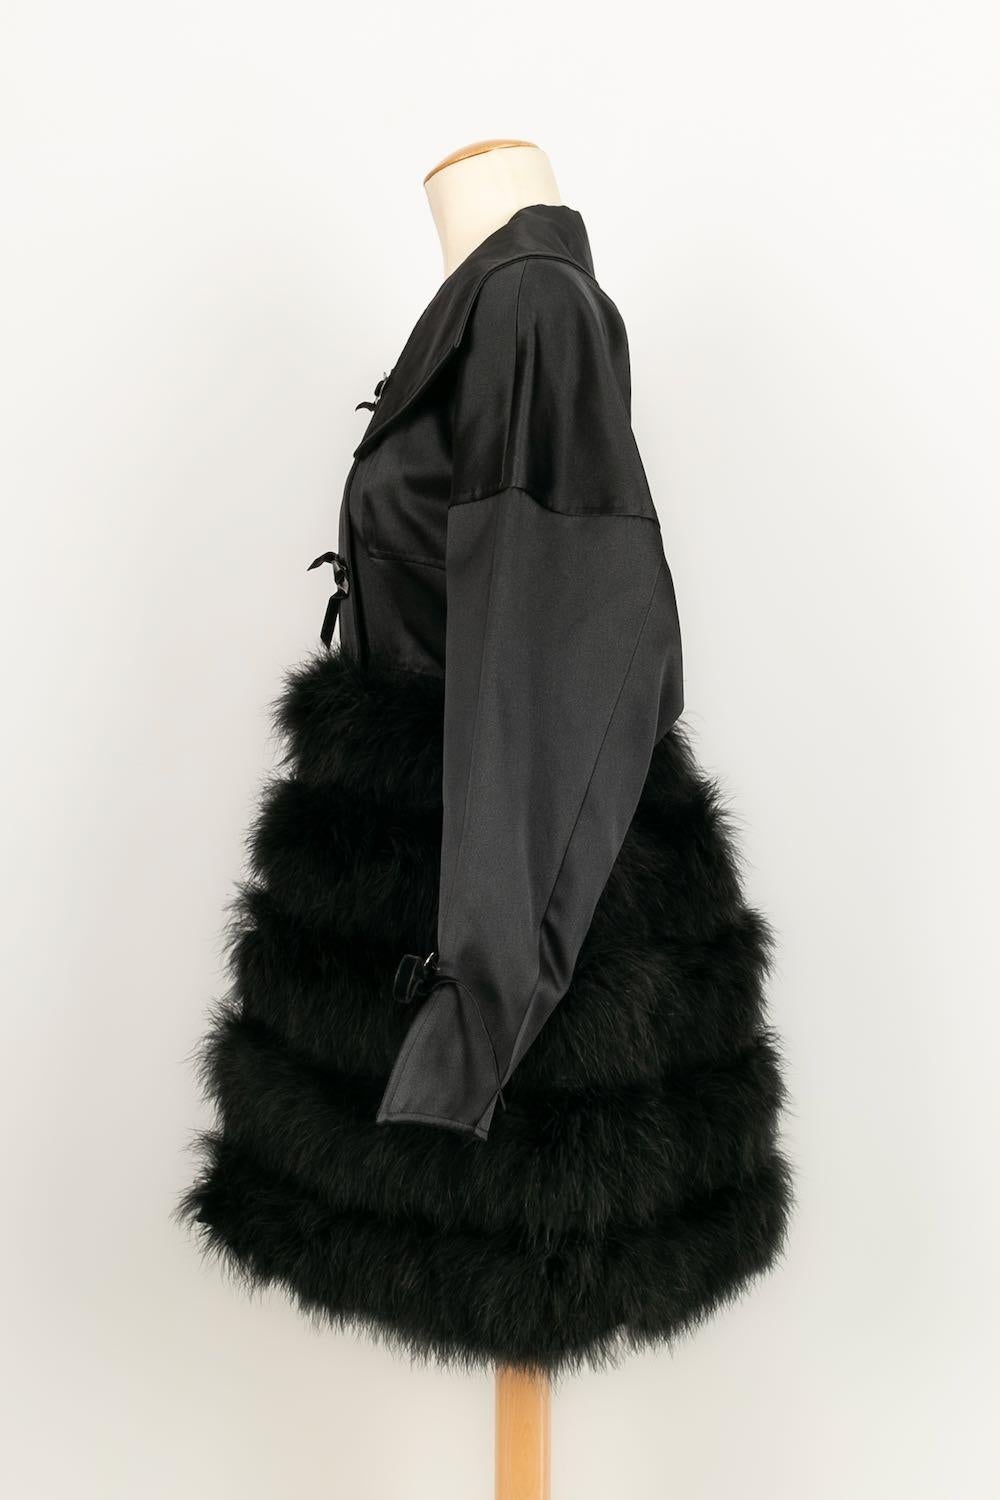 Montana -(Made in Italy) Black satin and marabou feather coat. No size indicated, corresponds to a 36 FR. Fall/Winter 1993 collection.

Additional information: 
Dimensions: Shoulder width: 41 cm, Chest: 43 cm, Waist: 33 cm, Sleeve length: 56 cm,